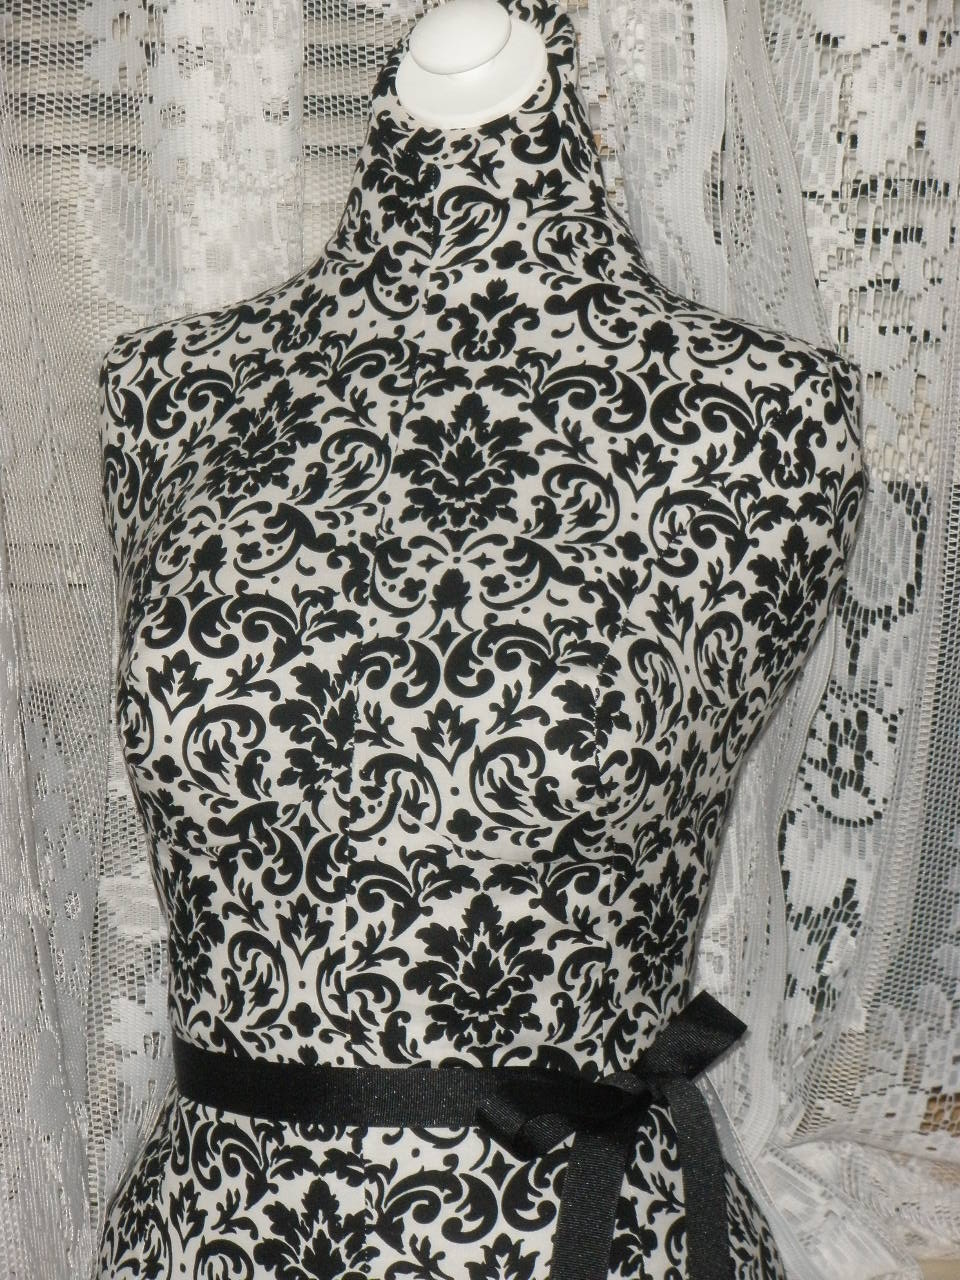 Boutique Dress Form Designs With Stand. Life Size Torso Great For Store Front Or Home Decor Inspired By Pottery Barn. Black And White Damask